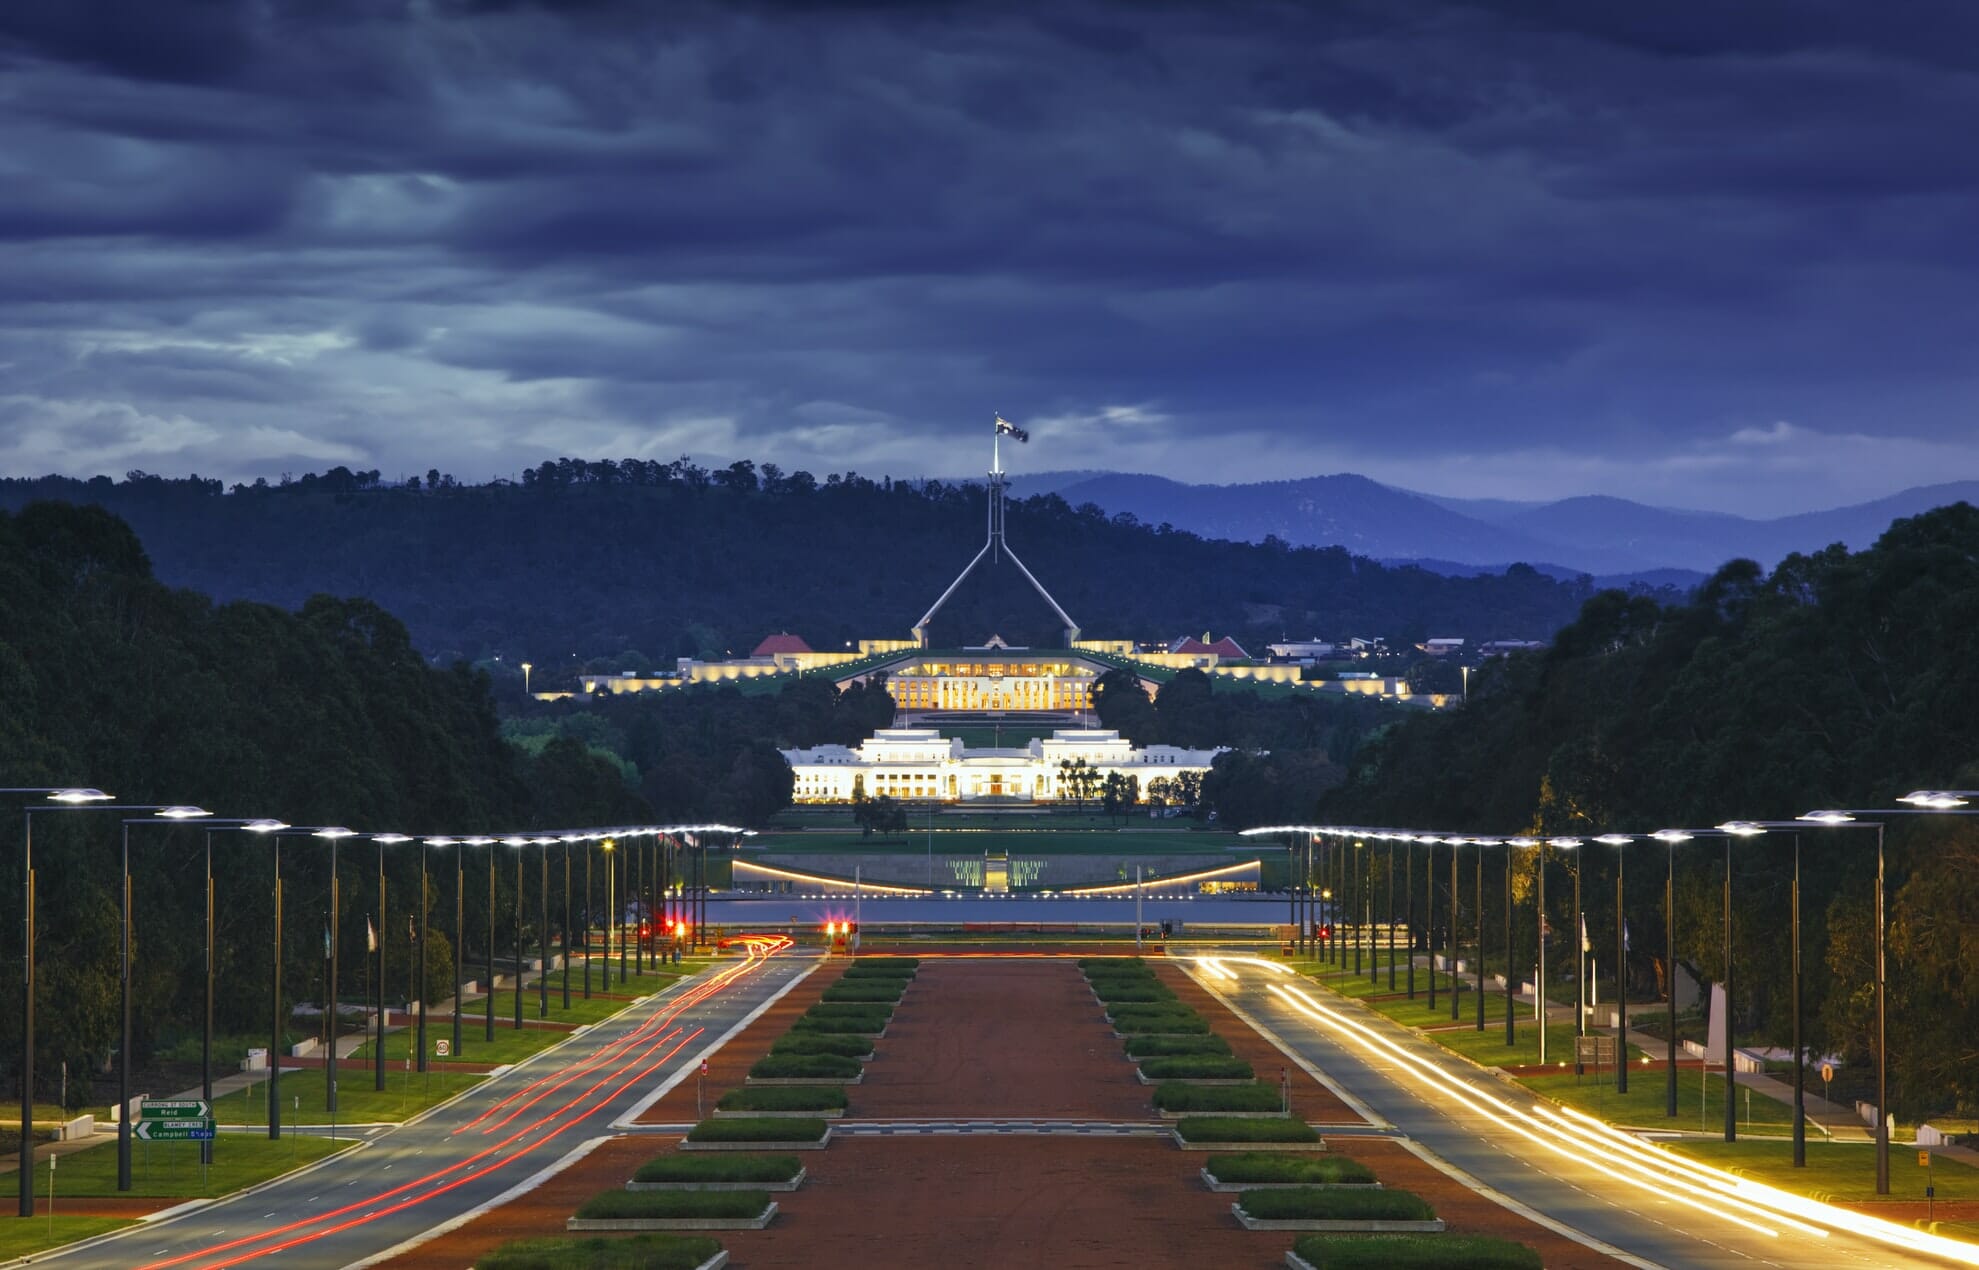 Parliament House in Canberra, ACT